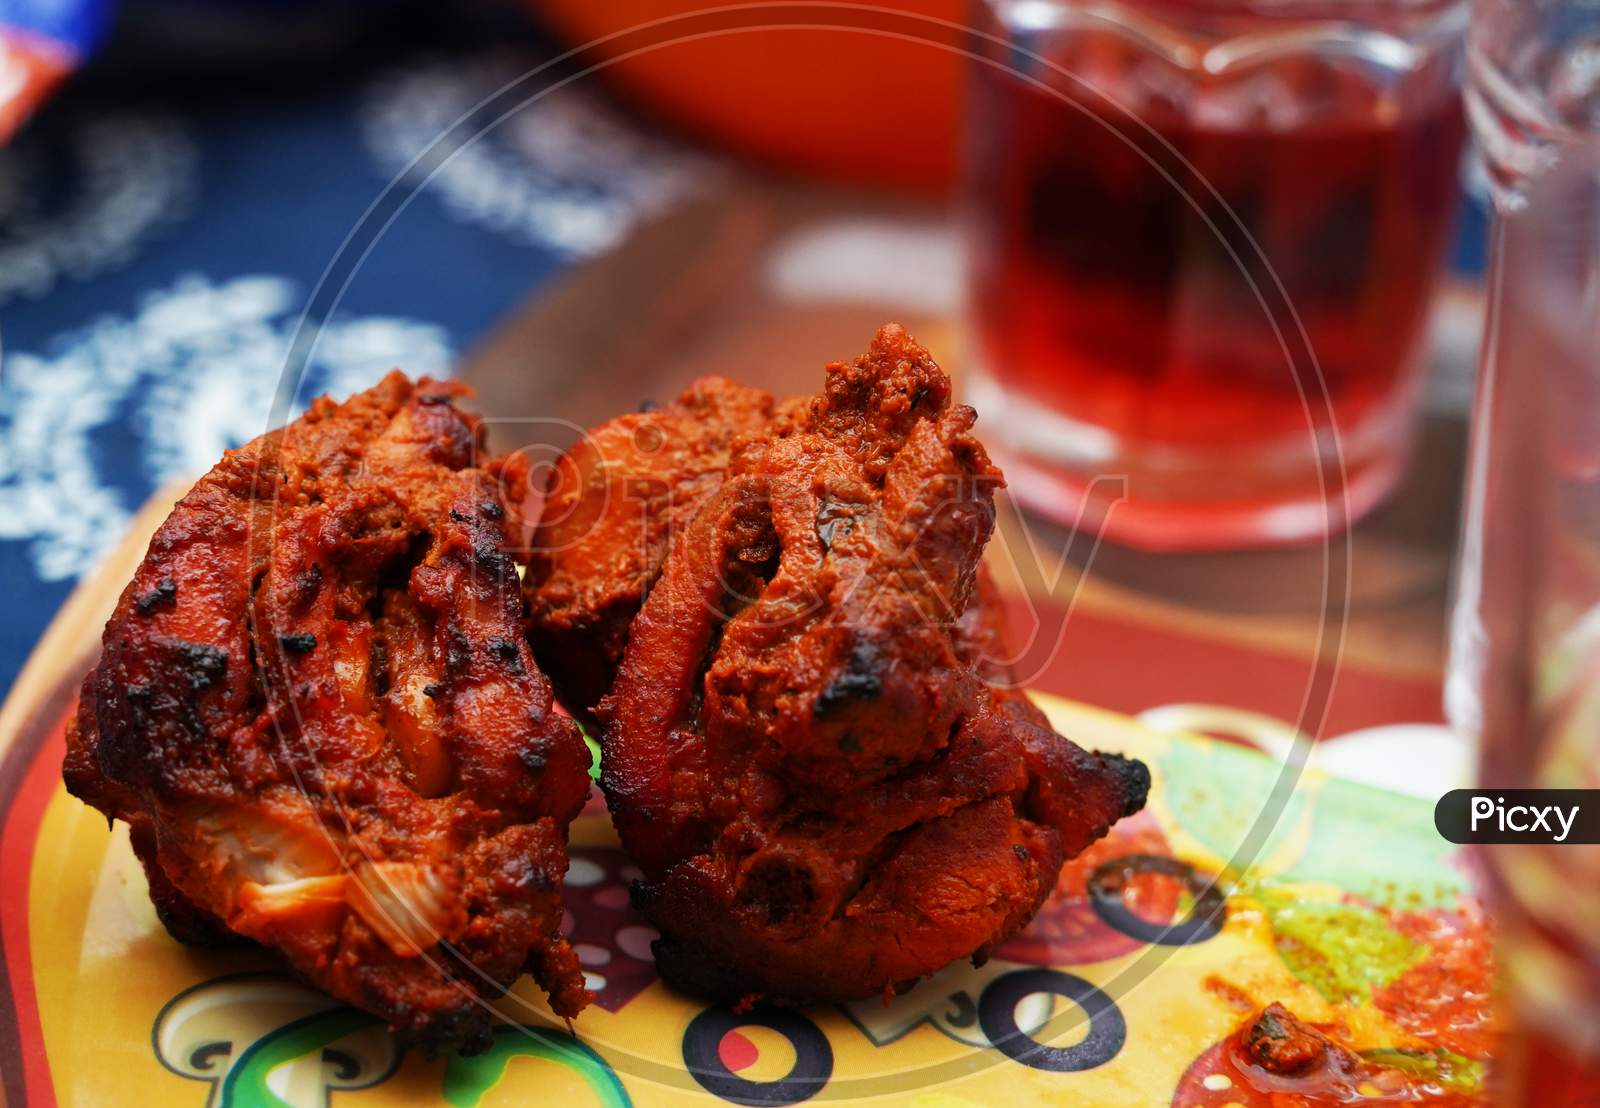 Close Up Image Of A Piece Of Fried And Roasted Chicken Tandoori Breast Piece.Its A Spicy North Indian Starter Dish. Served With Red Cranberry Juice In Glass